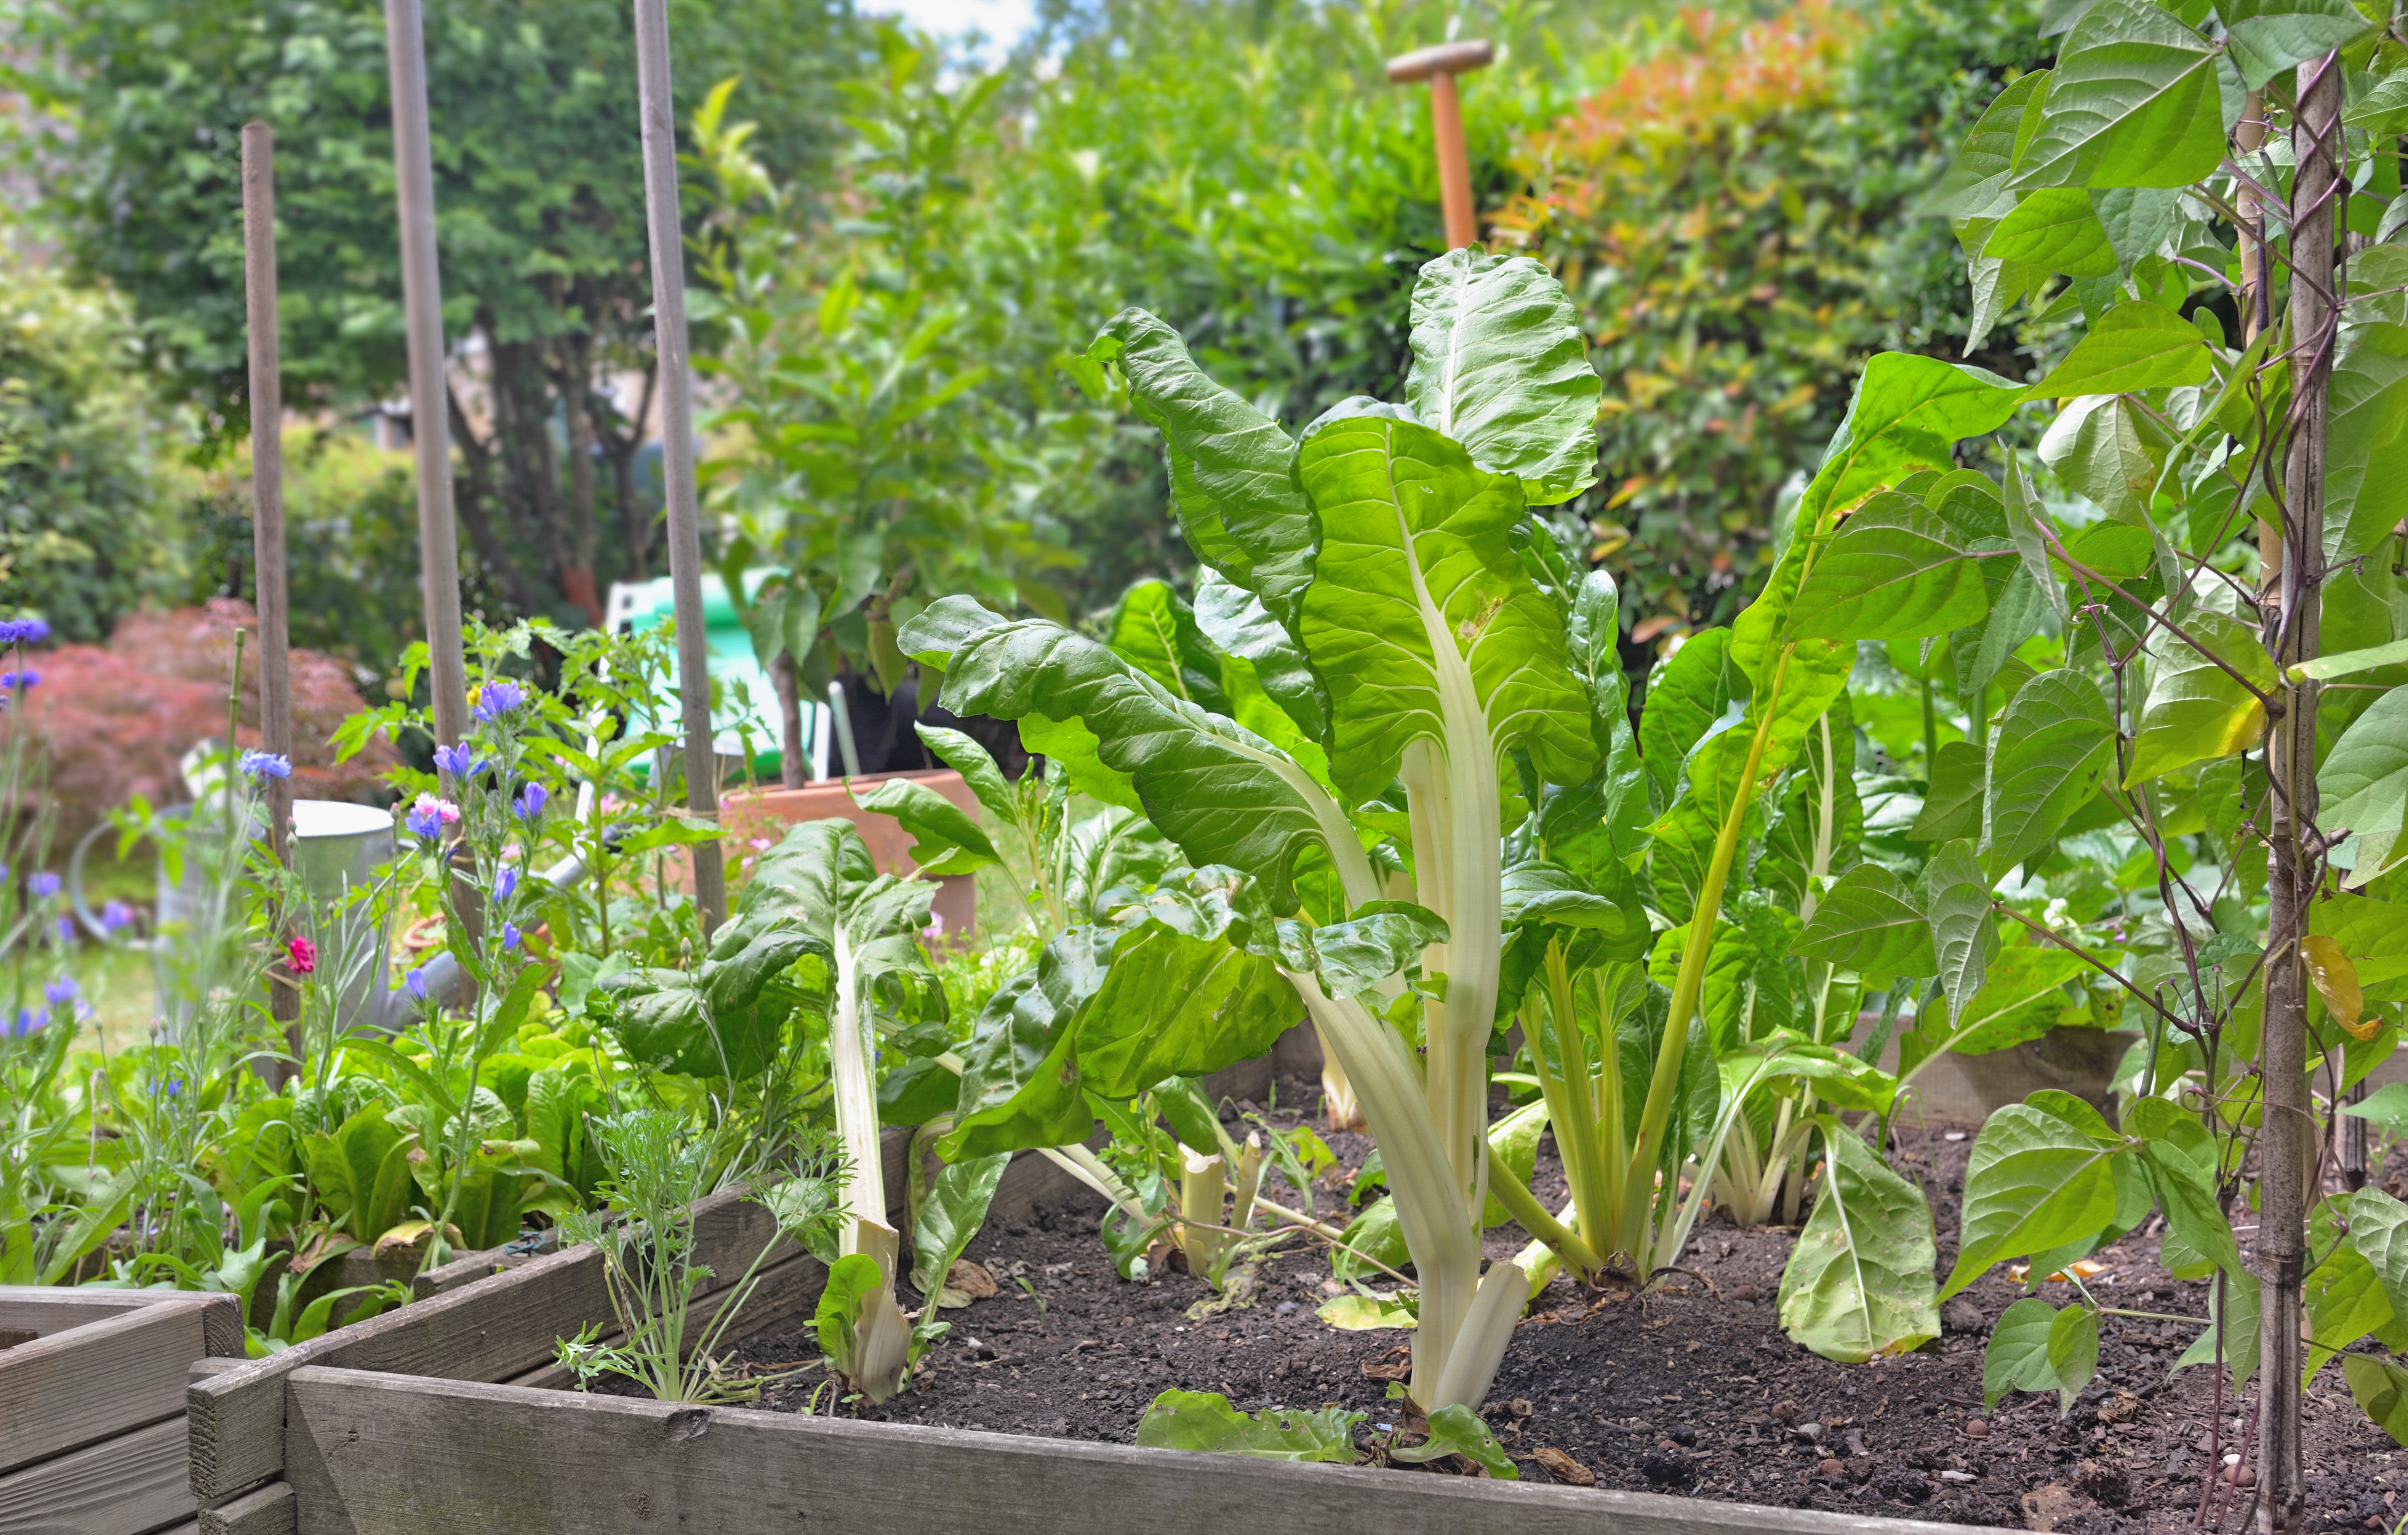 Swiss chard and other plants in a veggie garden